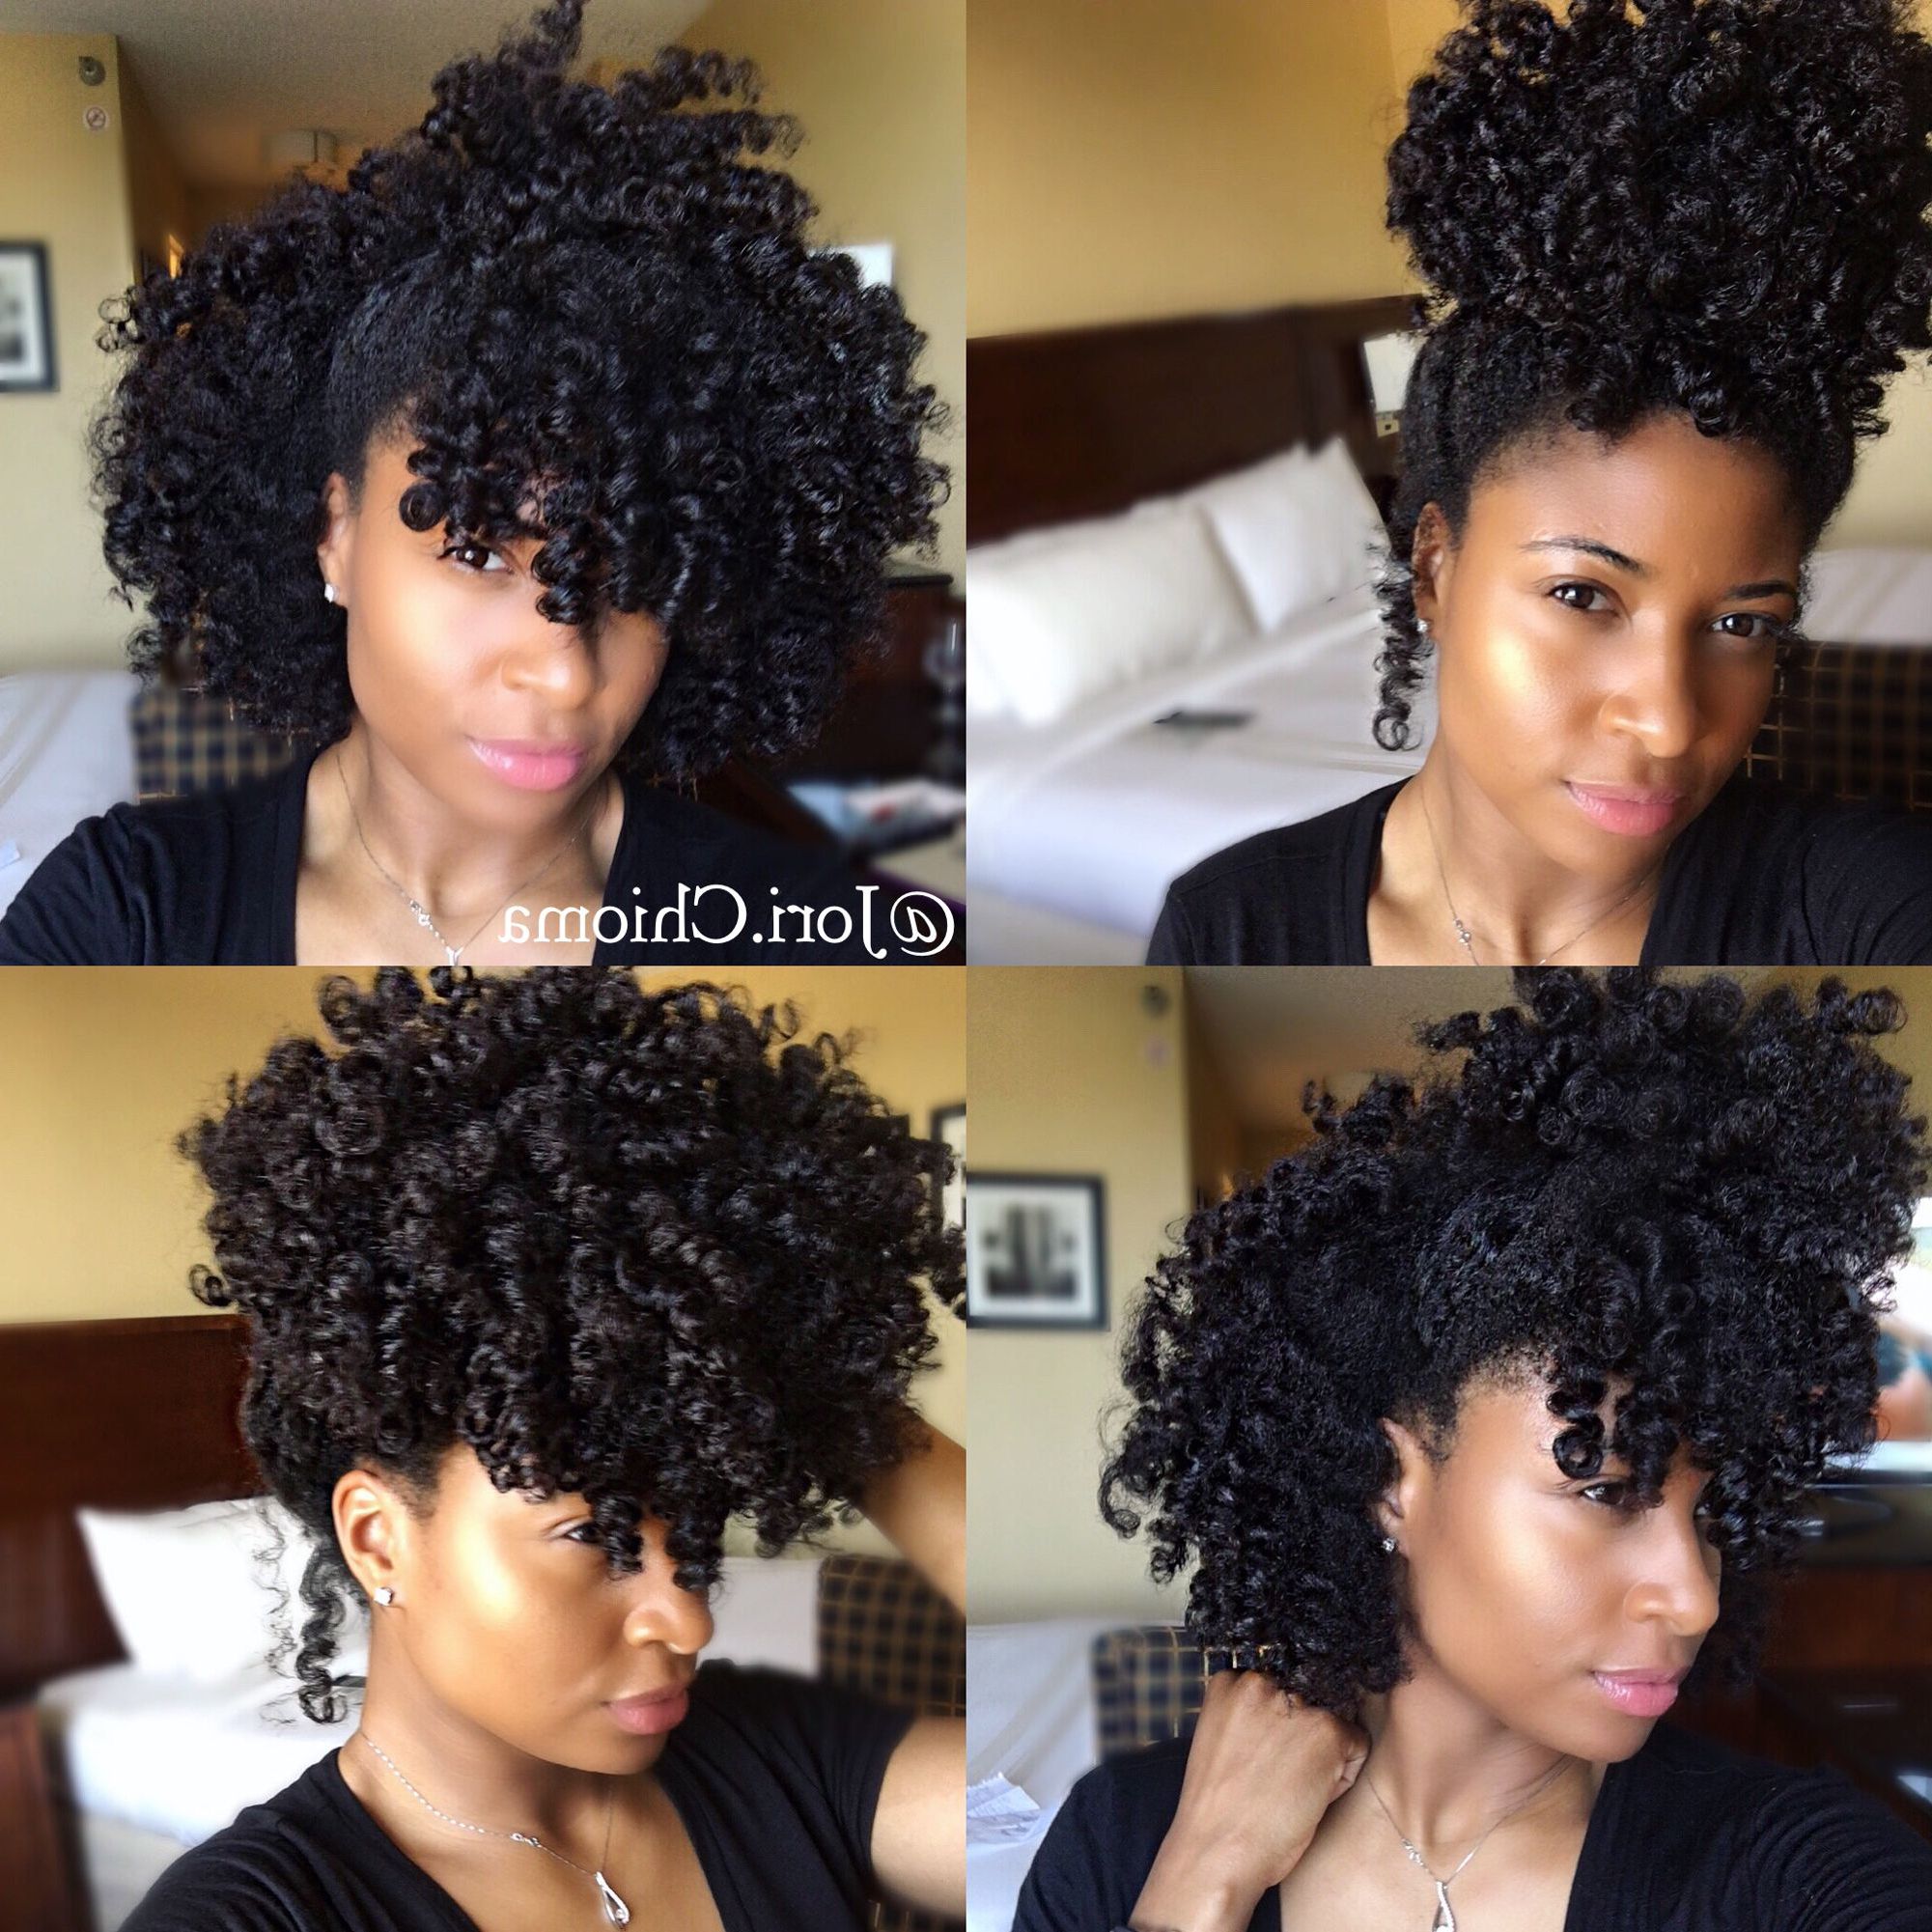 Widely Used Luscious Curls Hairstyles With Puffy Crown Intended For Cute Styles I Could Possibly Do With My Curls Or Perm Rod (View 7 of 20)